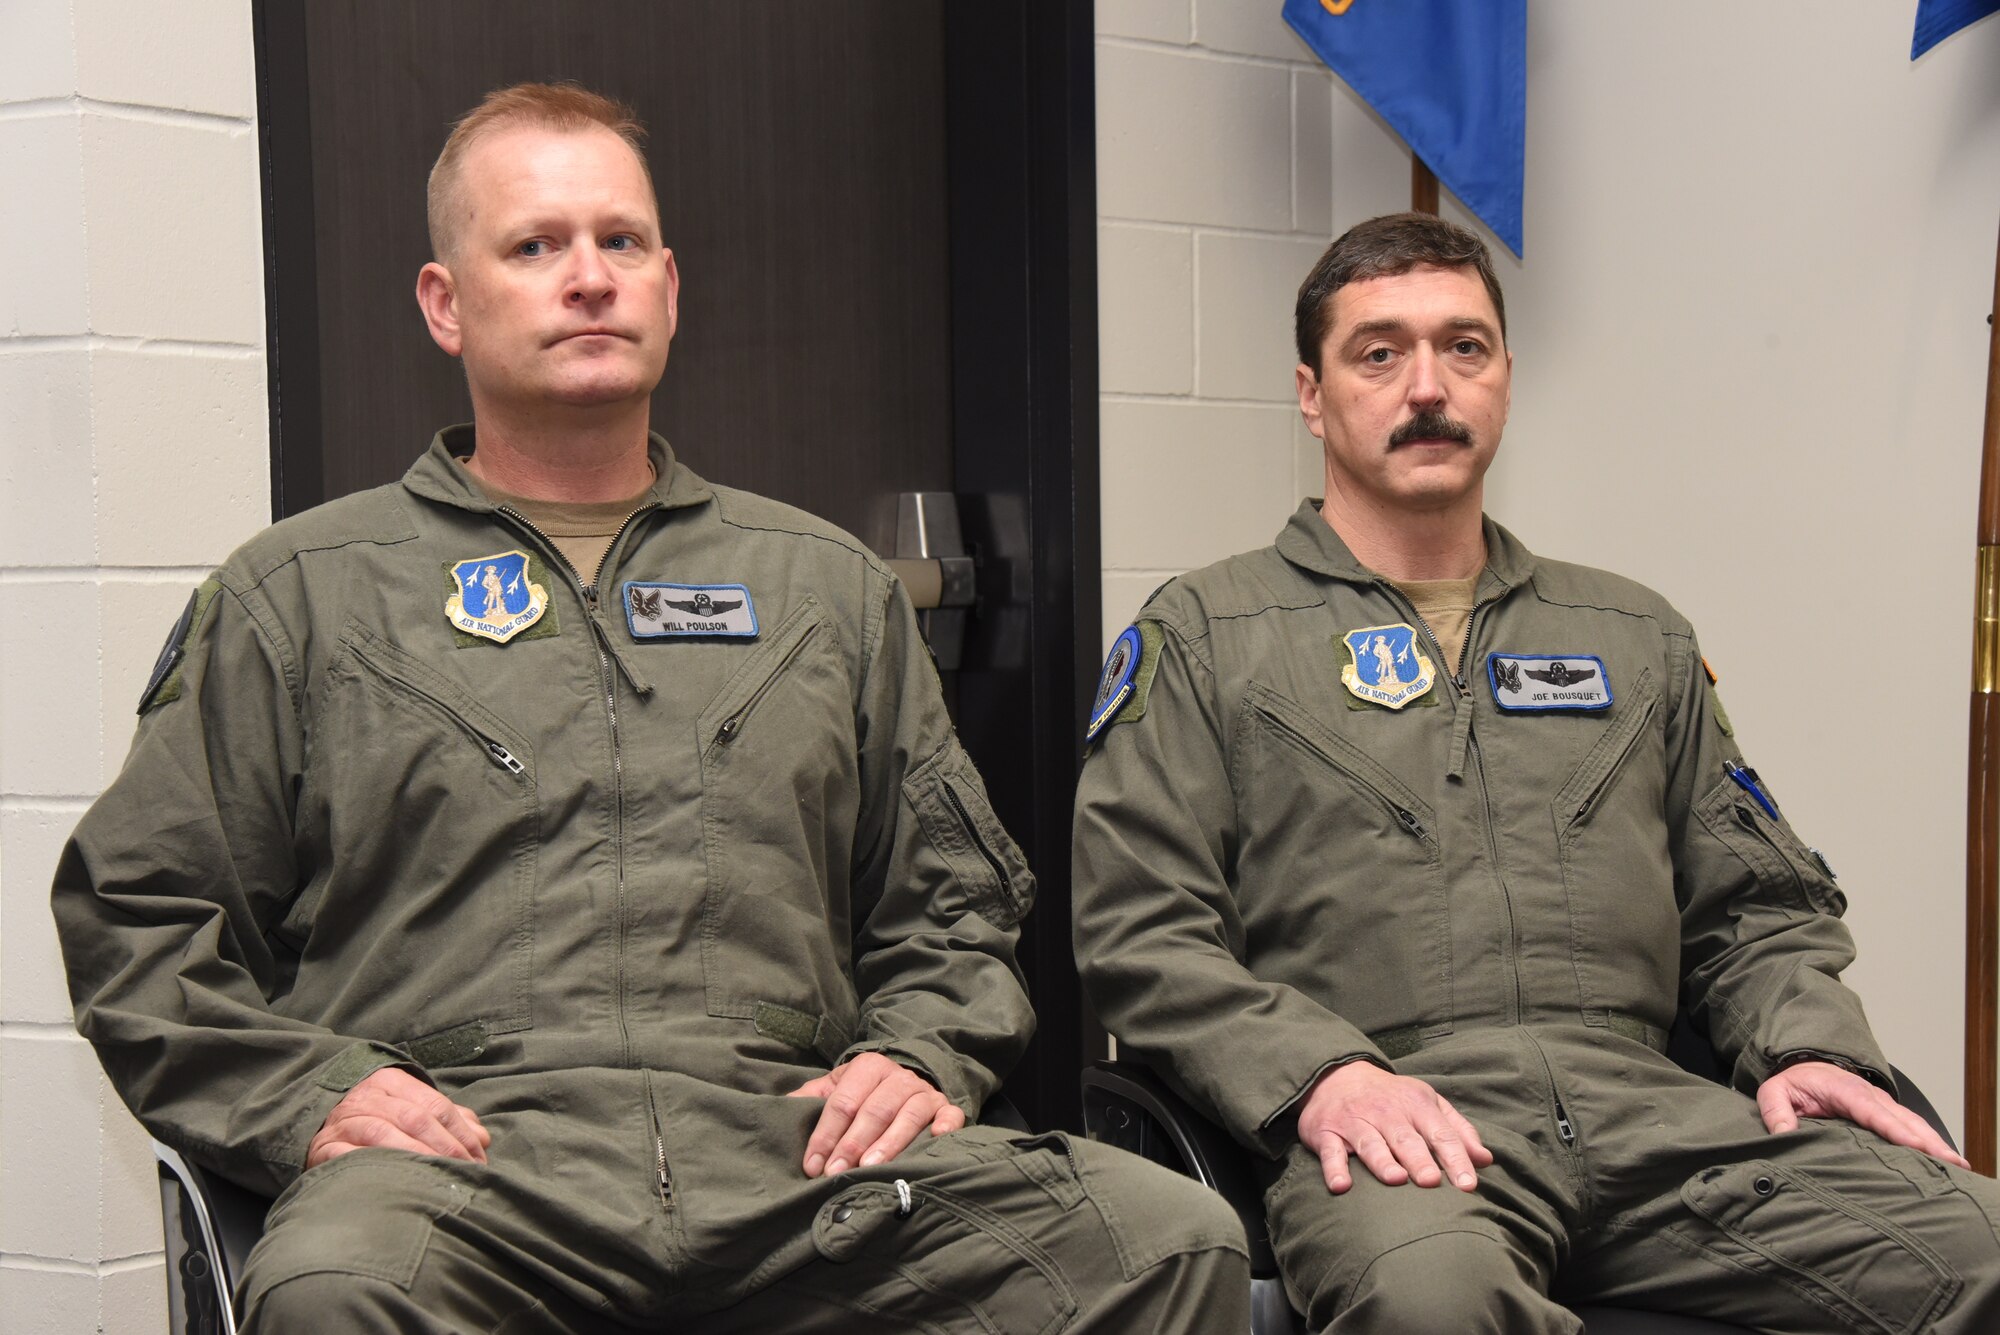 Lt. Col. William Poulson, outgoing 174th Air Refueling Squadron Commander, left, sits next to Lt. Col. Joseph Bousquet, the incoming 174th ARS Commander